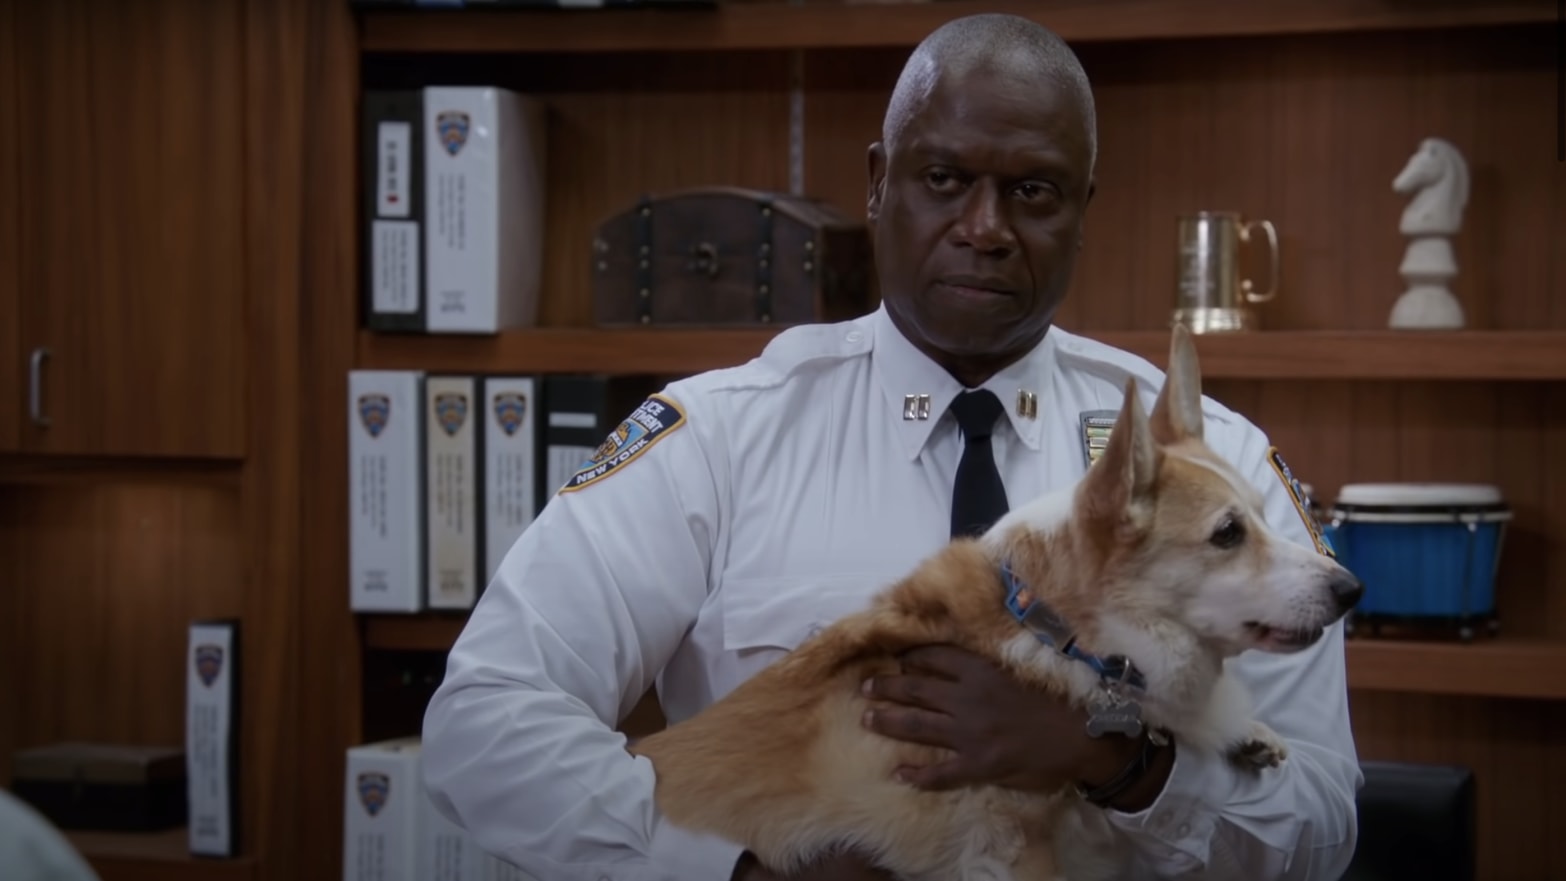 Andre Braugher as Captain Holt in Brooklyn Nine-Nine, holding Cheddar the dog.